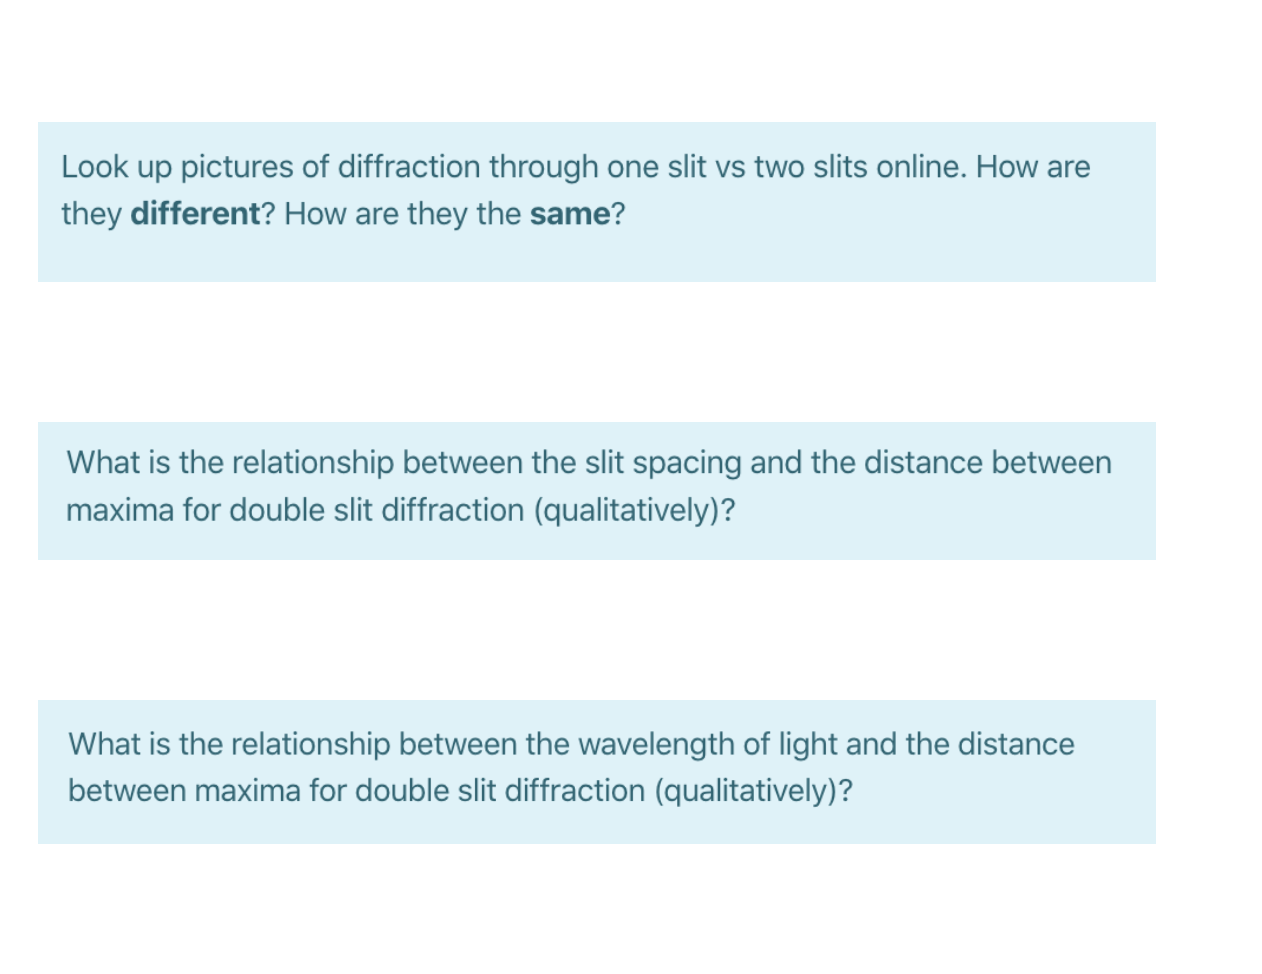 Look up pictures of diffraction through one slit vs two slits online. How are
they different? How are they the same?
What is the relationship betwe
the slit spacing and the distance between
maxima for double slit diffraction (qualitatively)?
What is the relationship between the wavelength of light and the distance
between maxima for double slit diffraction (qualitatively)?
